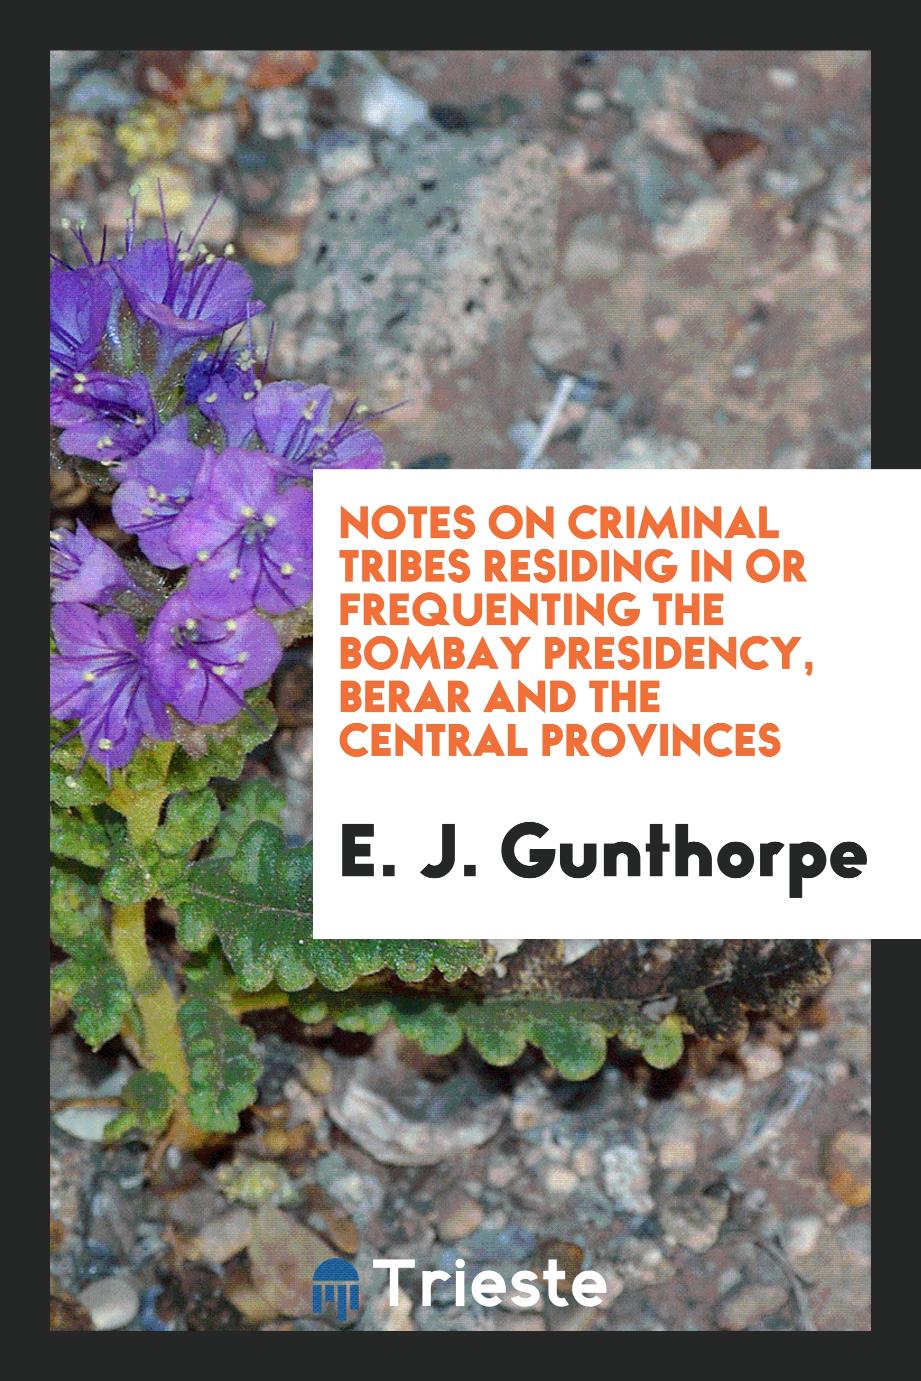 Notes on Criminal Tribes Residing in Or Frequenting the Bombay Presidency, Berar and The Central Provinces